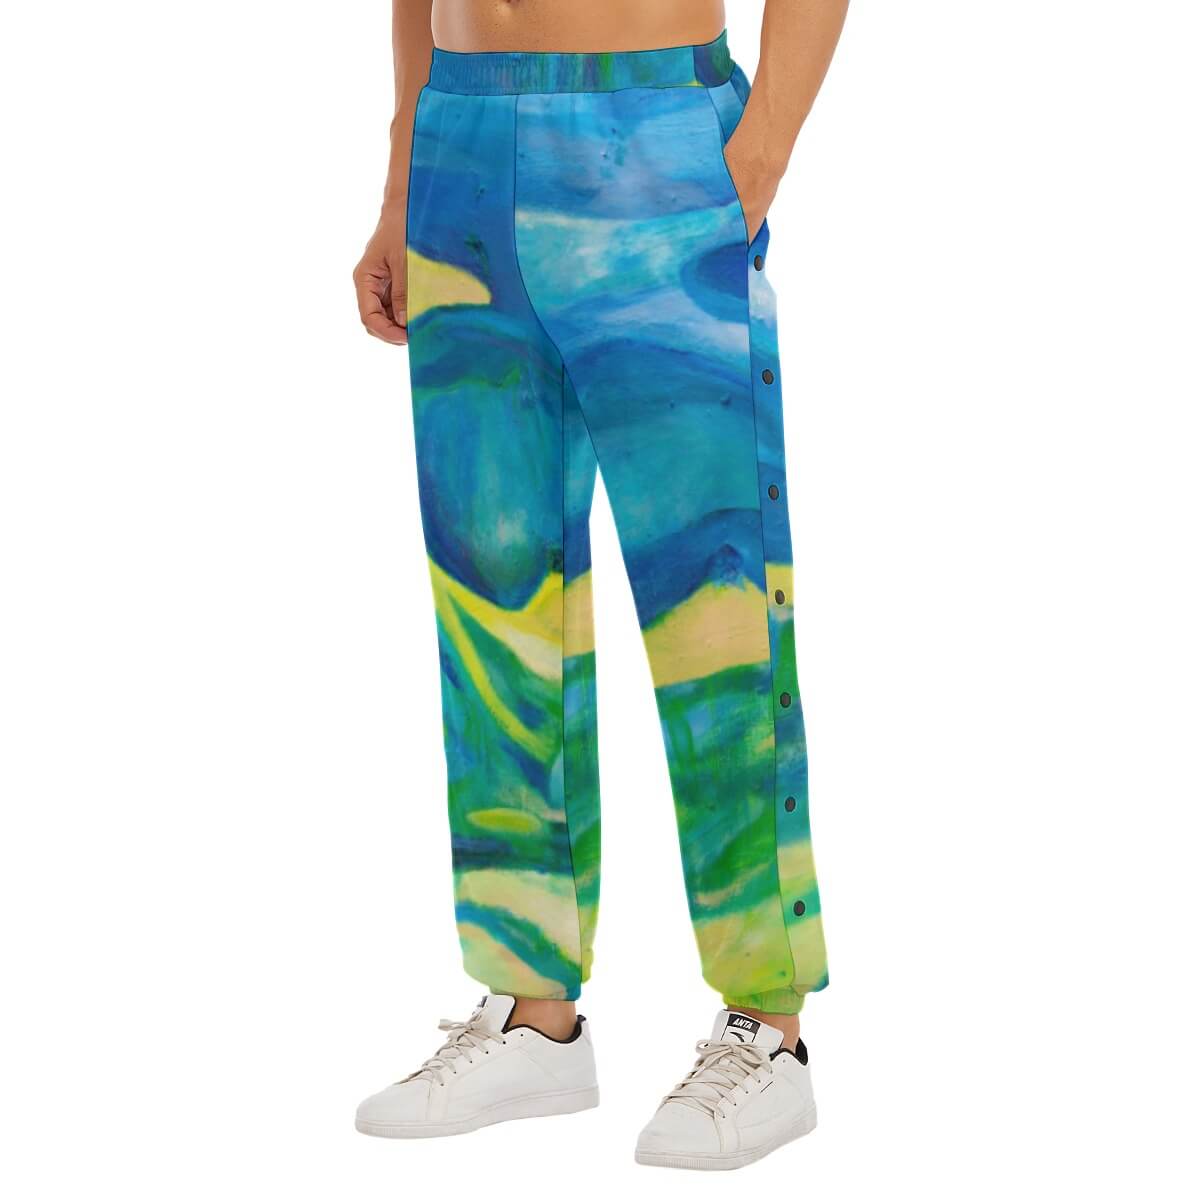 Men's Basketball Sweatpants Under The Sea Collection